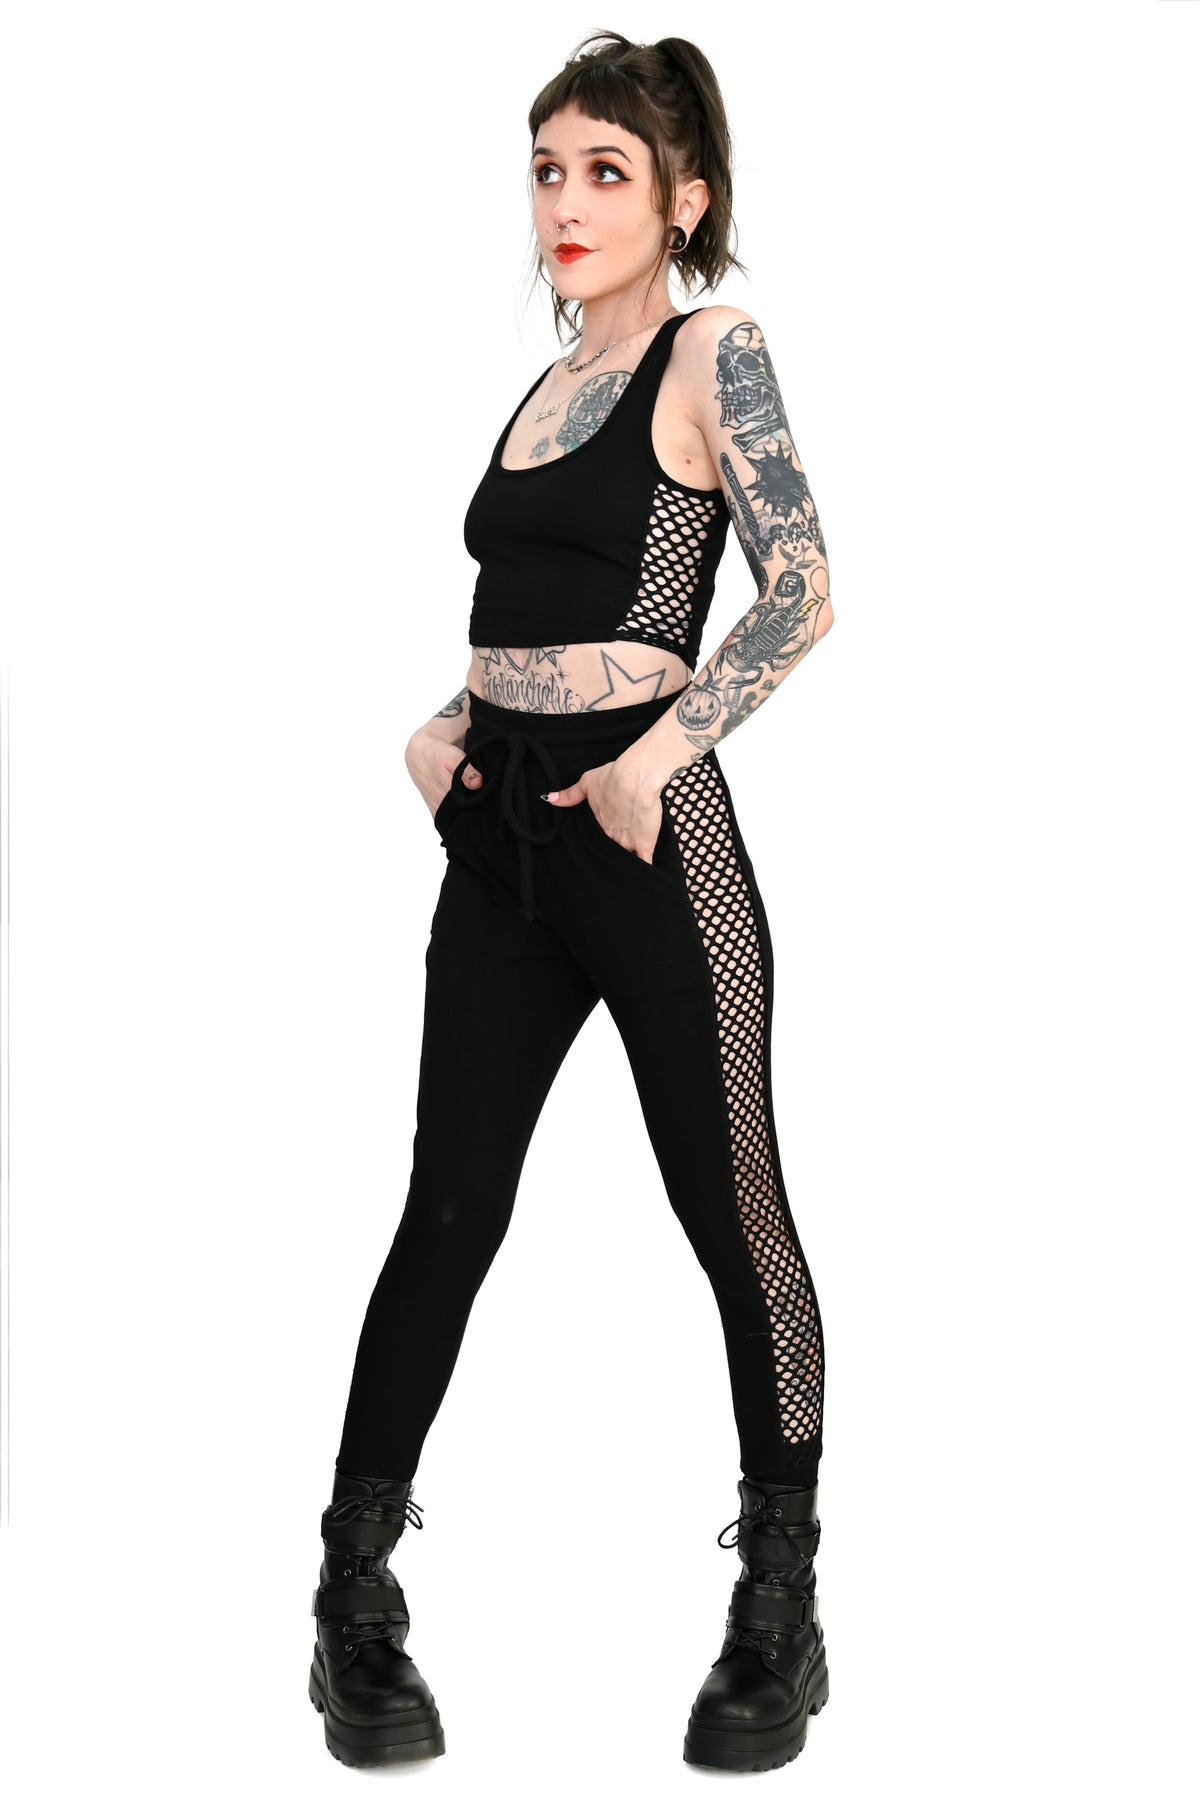 black jogger and crop top set with fishnet panels down the sides of each piece